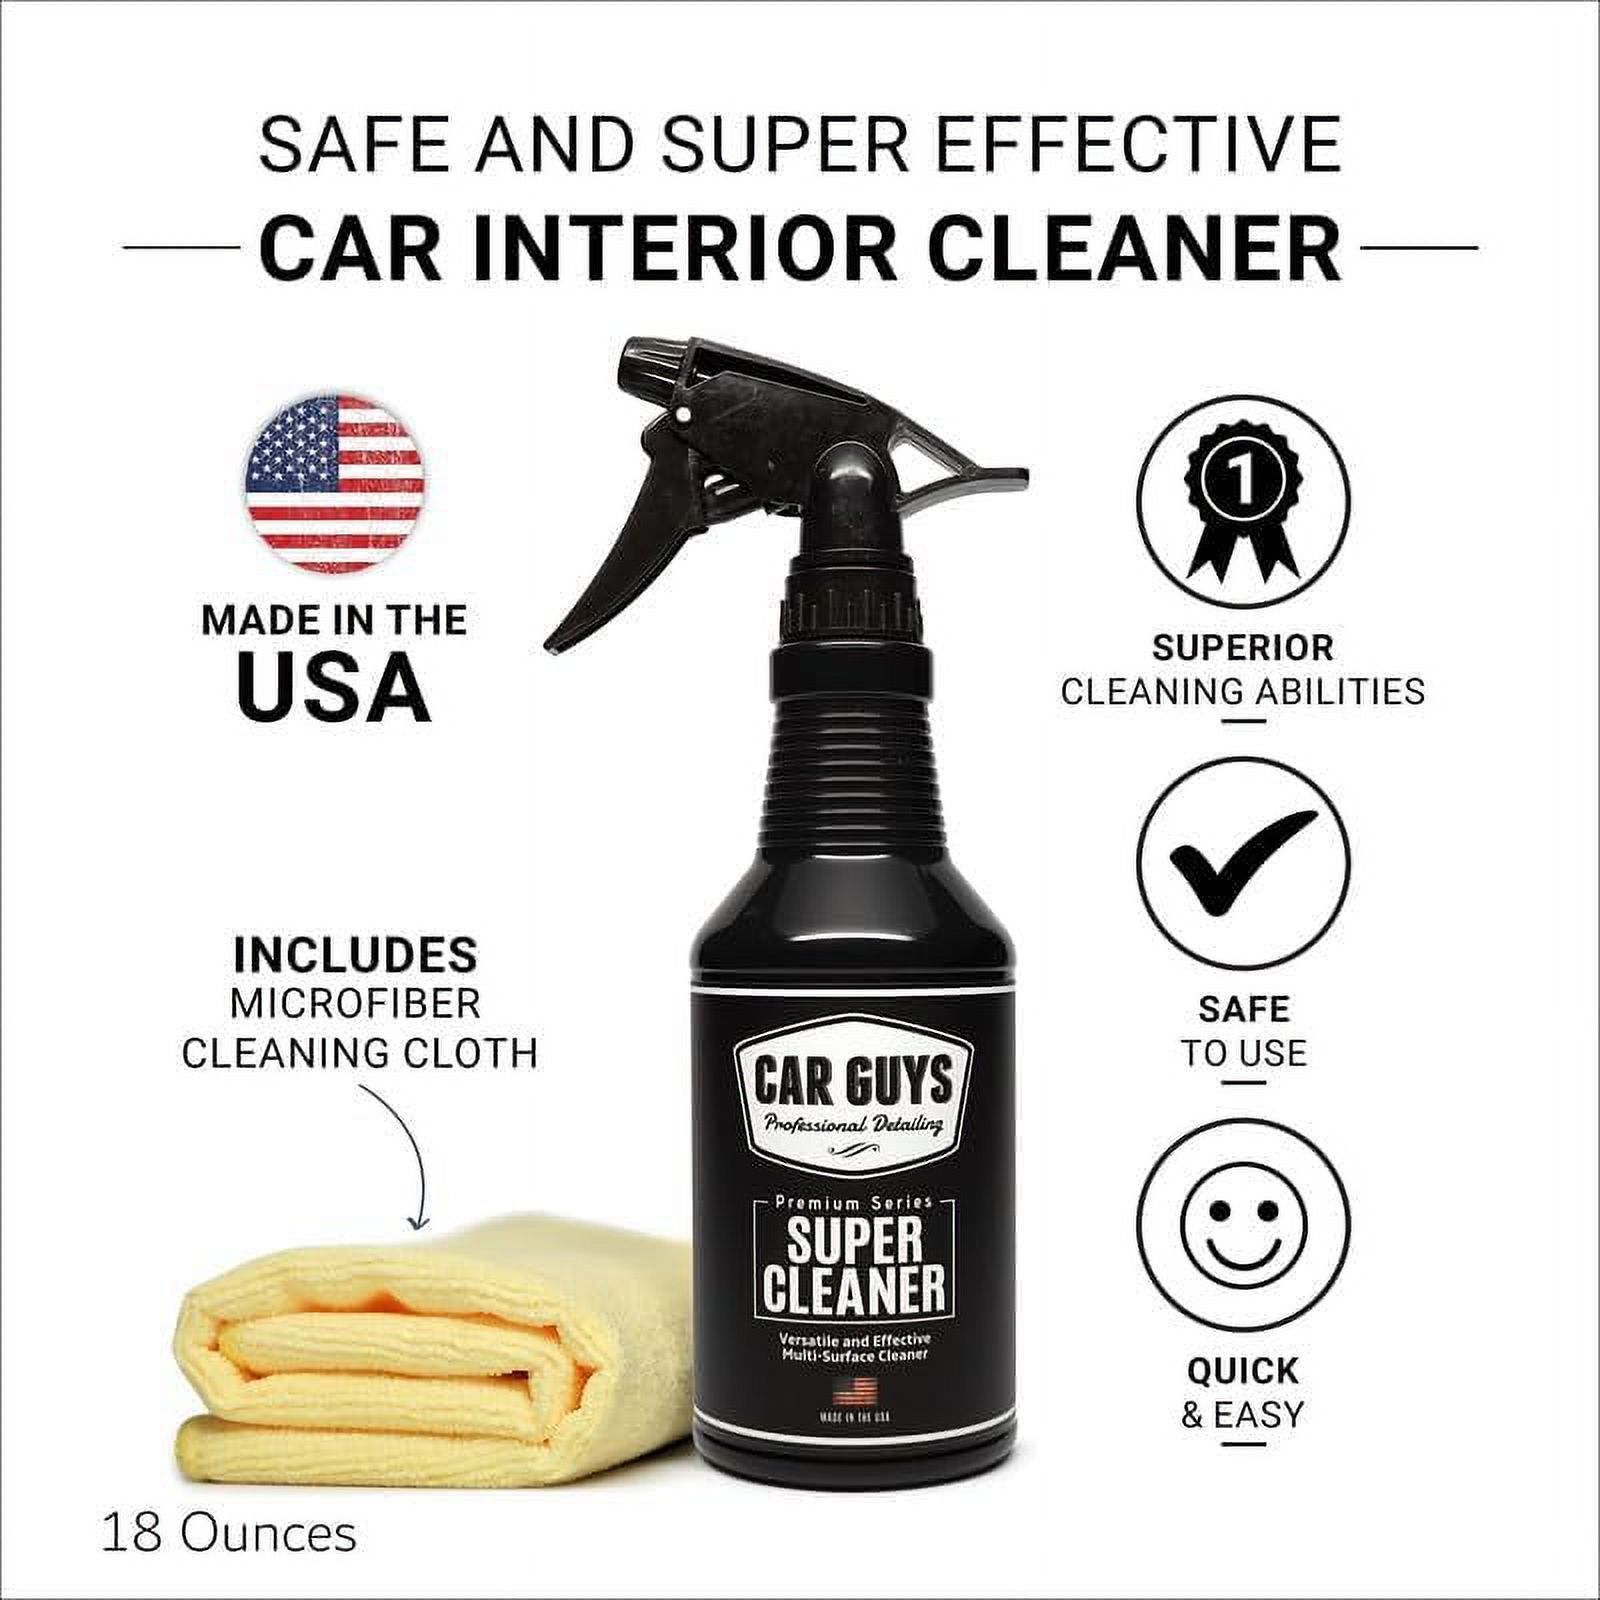 CarGuys Super Cleaner - Effective All Purpose Cleaner - Best for Leather Vinyl Carpet Upholstery Plastic Rubber and Much More! - 18 oz Kit - image 2 of 5